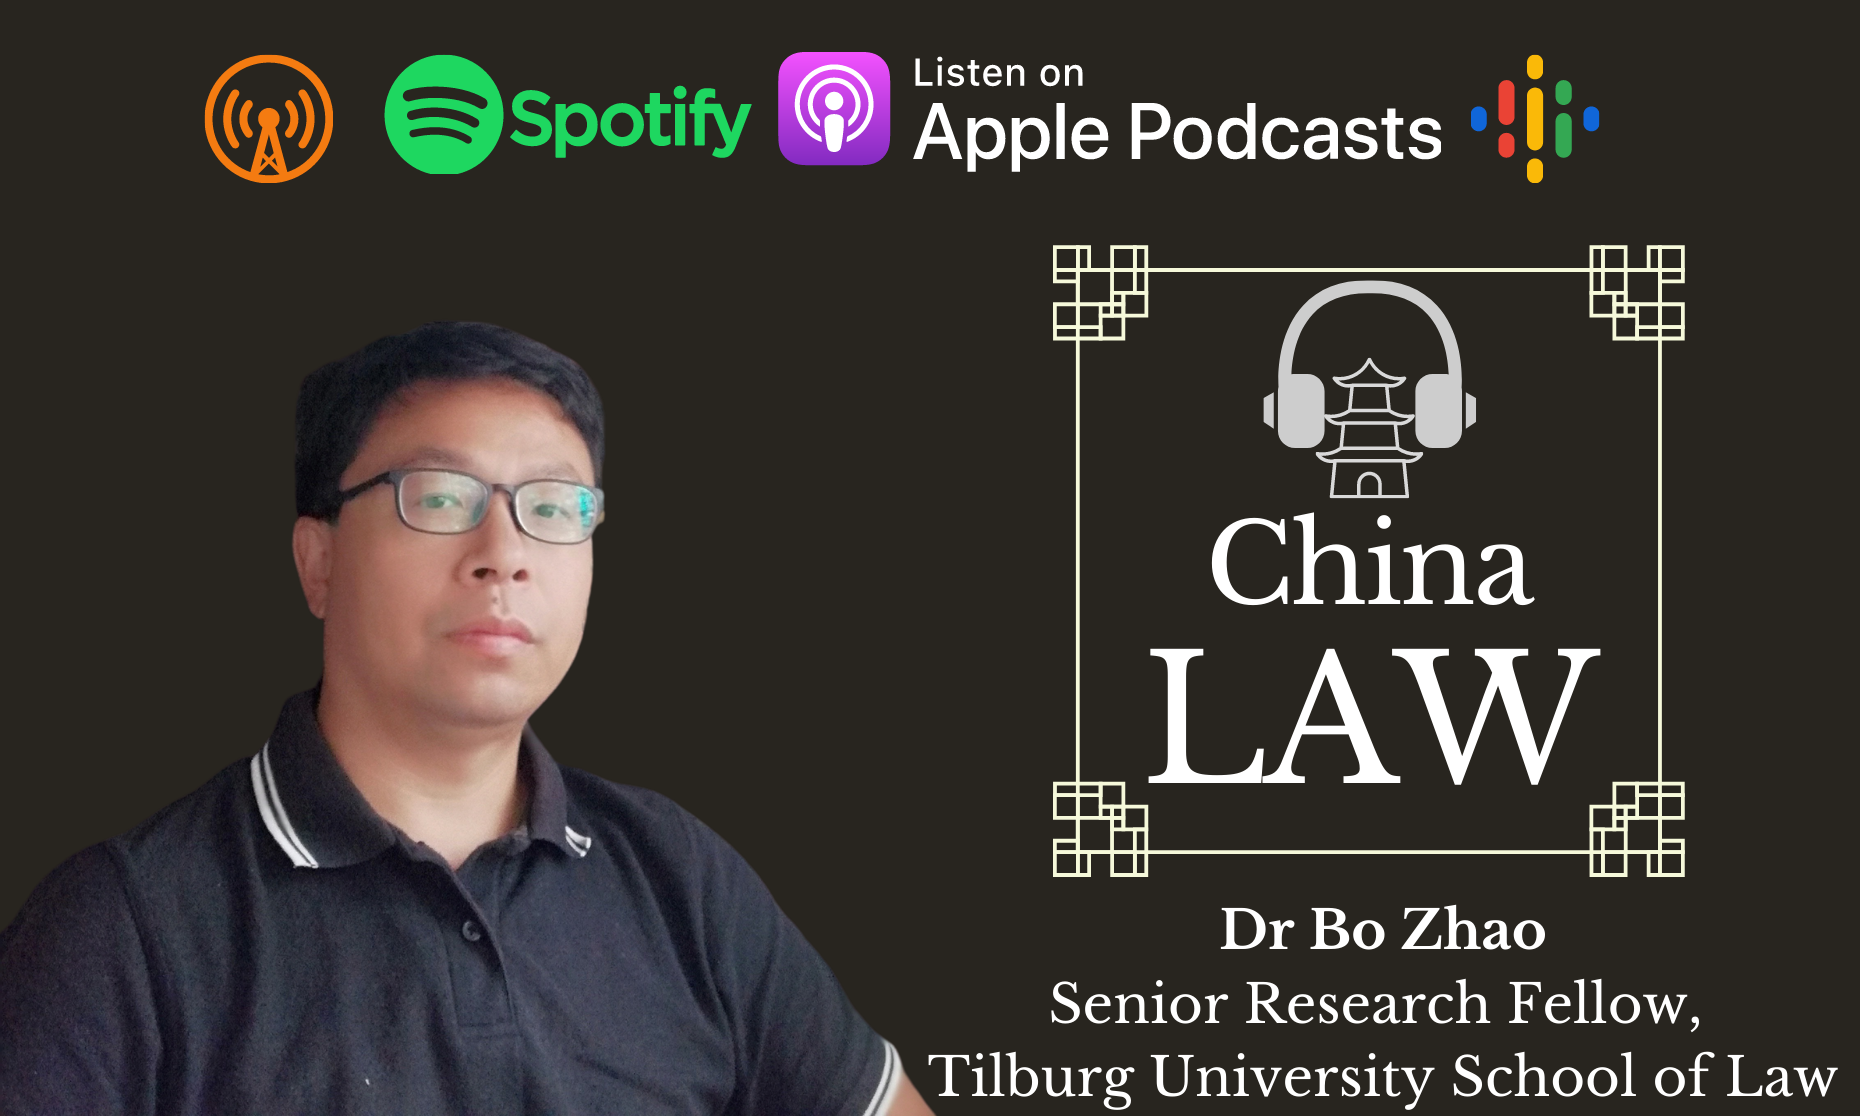 Podcast #15: Data War - China's Cross-Border Data Controls Compared with the EU, US